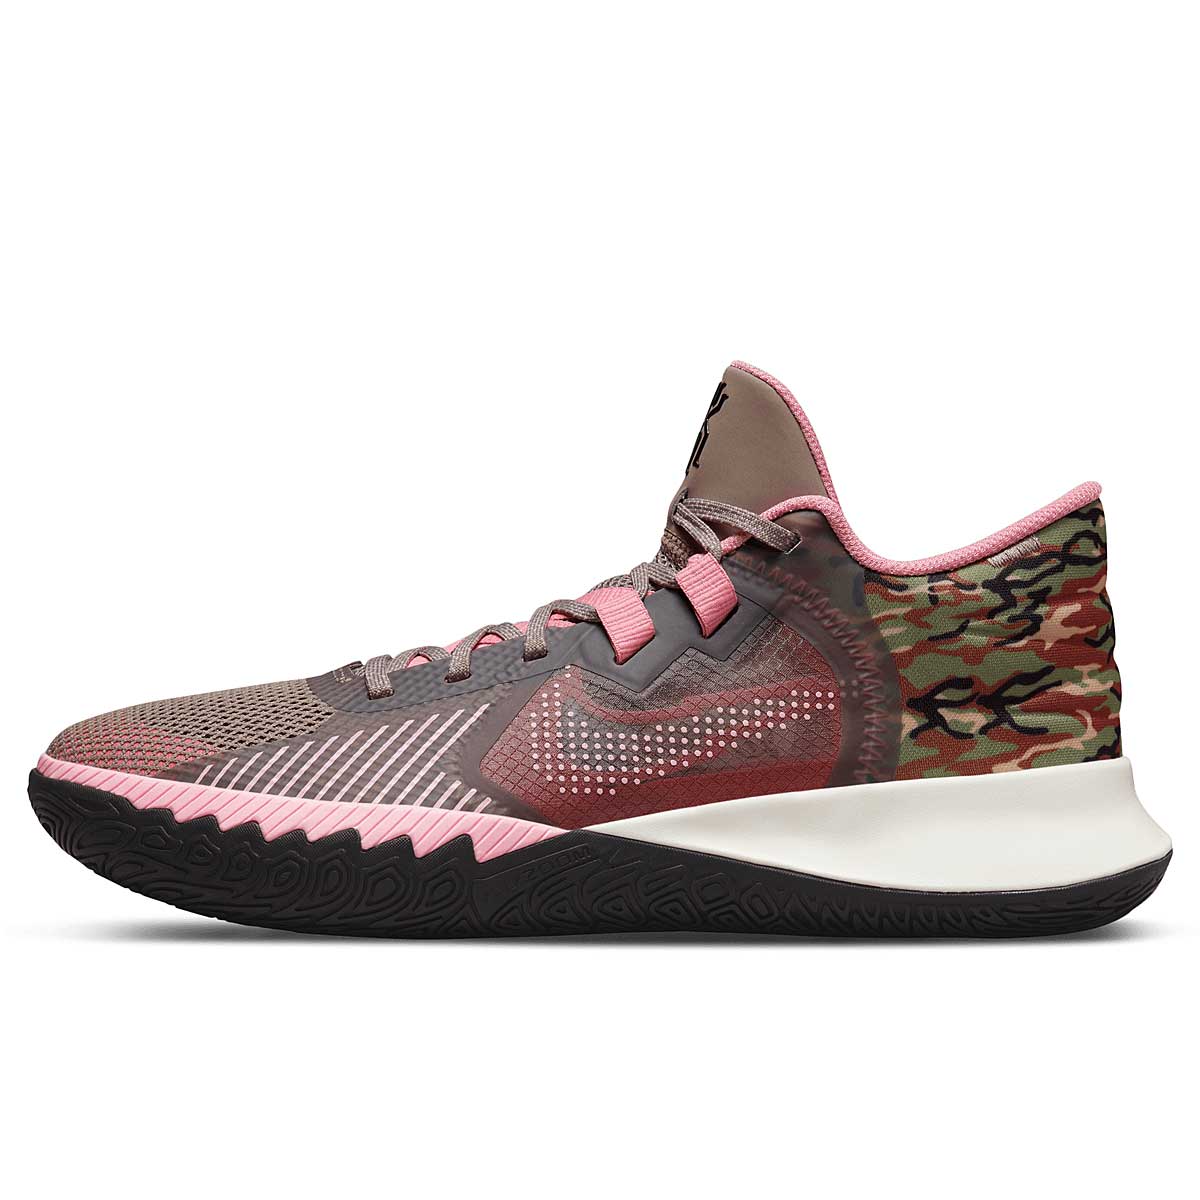 Nike Kyrie Flytrap 5, Moon Fossil/Med Soft Pink-Sail